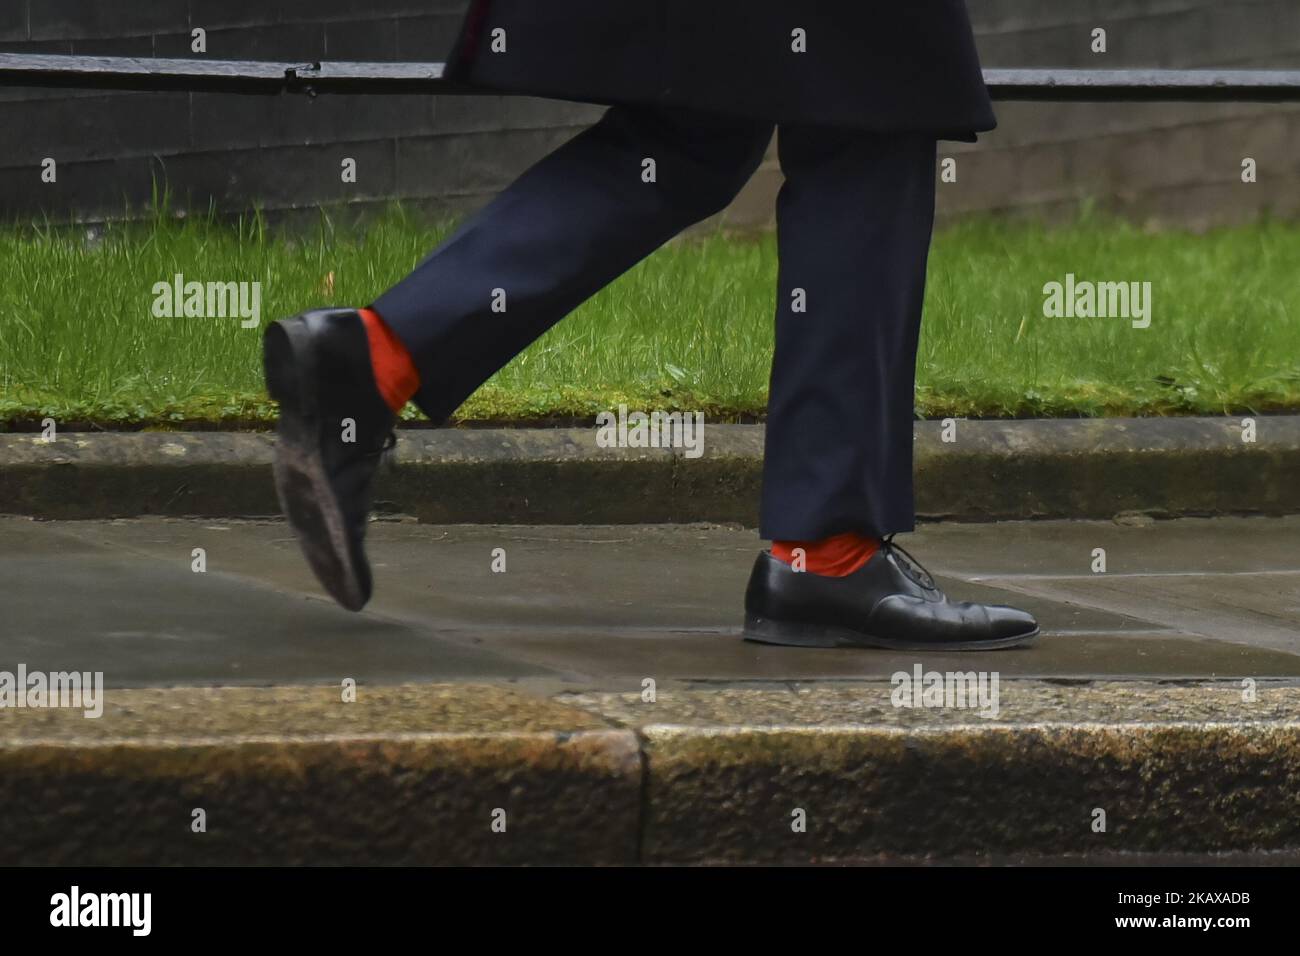 Detail of Britain's Secretary of State for Digital, Culture, Media and Sport Mat Hancock as he leaves 10 Downing Street after attending the weekly Cabinet Meeting, London on March 27, 2018. Prime Minister Theresa May is facing another Brexit hurdle after the opposition Labour Party announced its pushing for a legal commitment to avoid a hard border with Ireland after Britain leaves the European Union. The Migration Advisory Committee (MAC) said businesses are concerned about their ability to recruit workers from the EU after Britain leaves the EU. UK employers also see EU workers as 'more reli Stock Photo